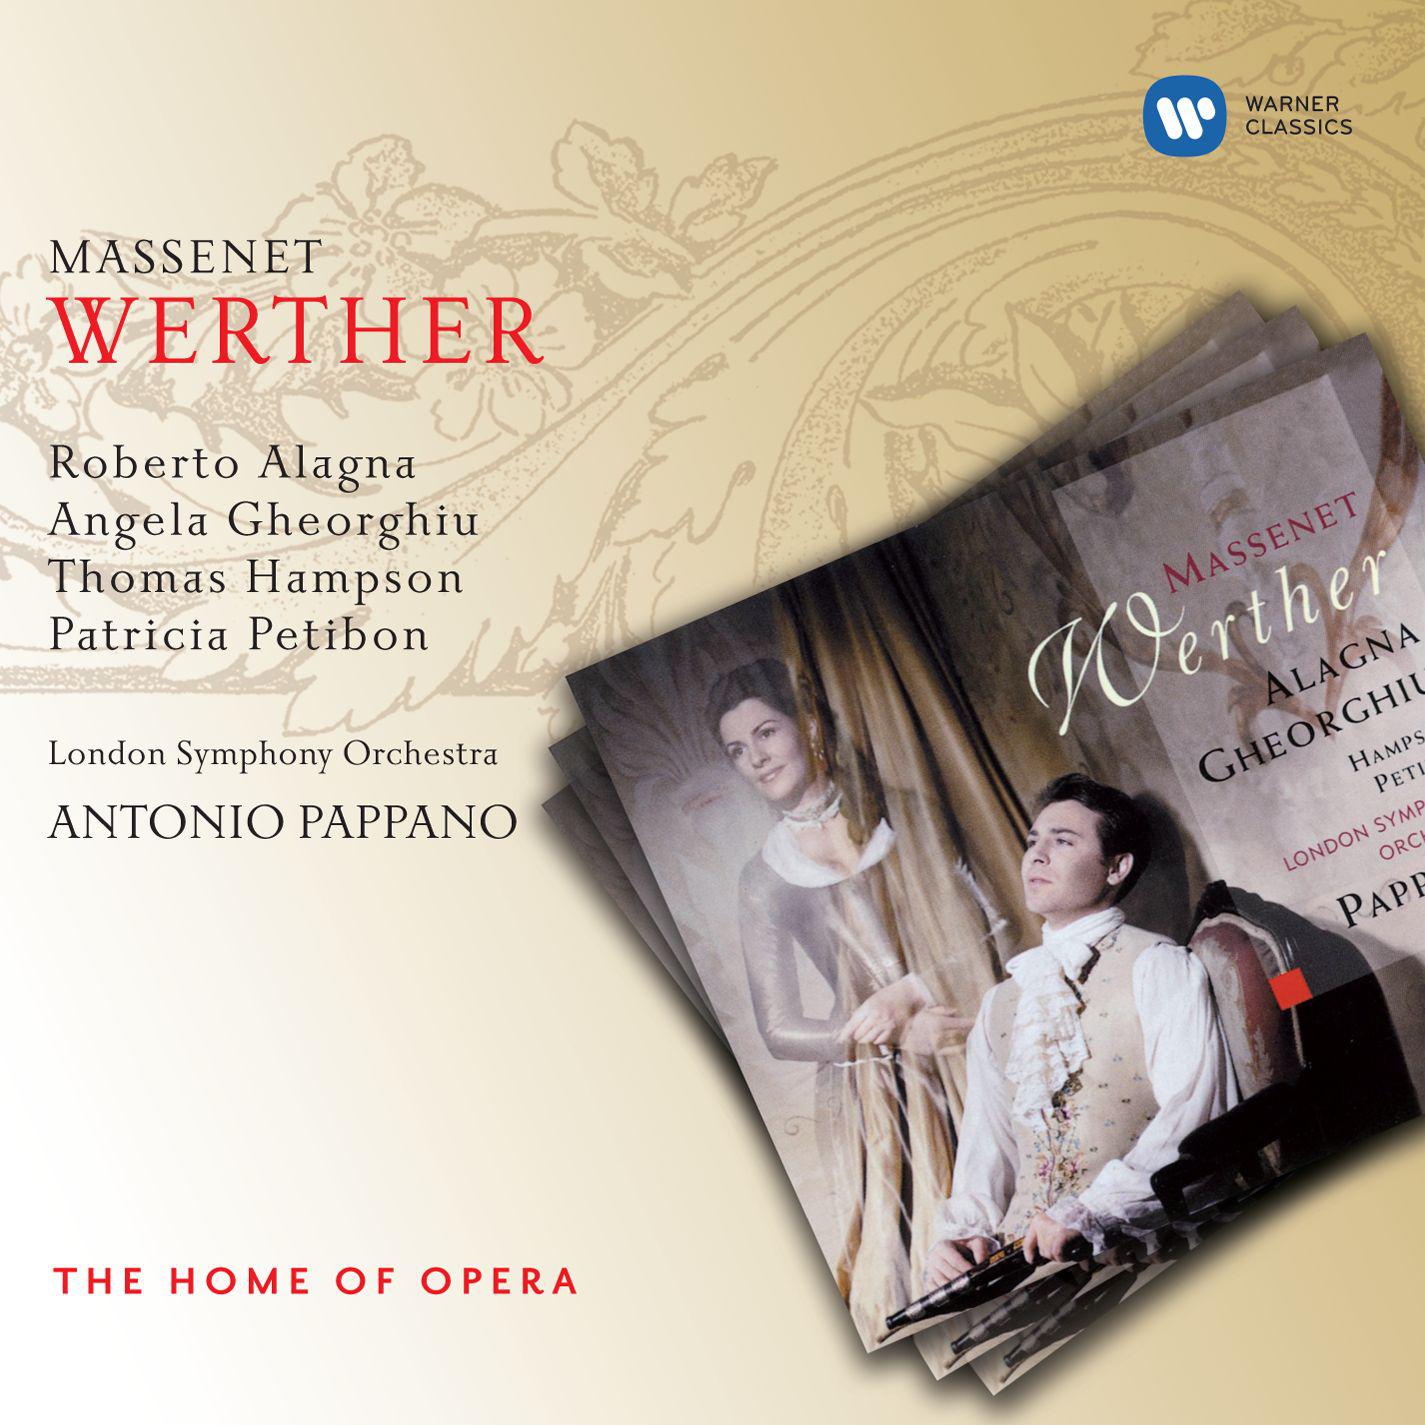 Werther, Act 3: Pre lude